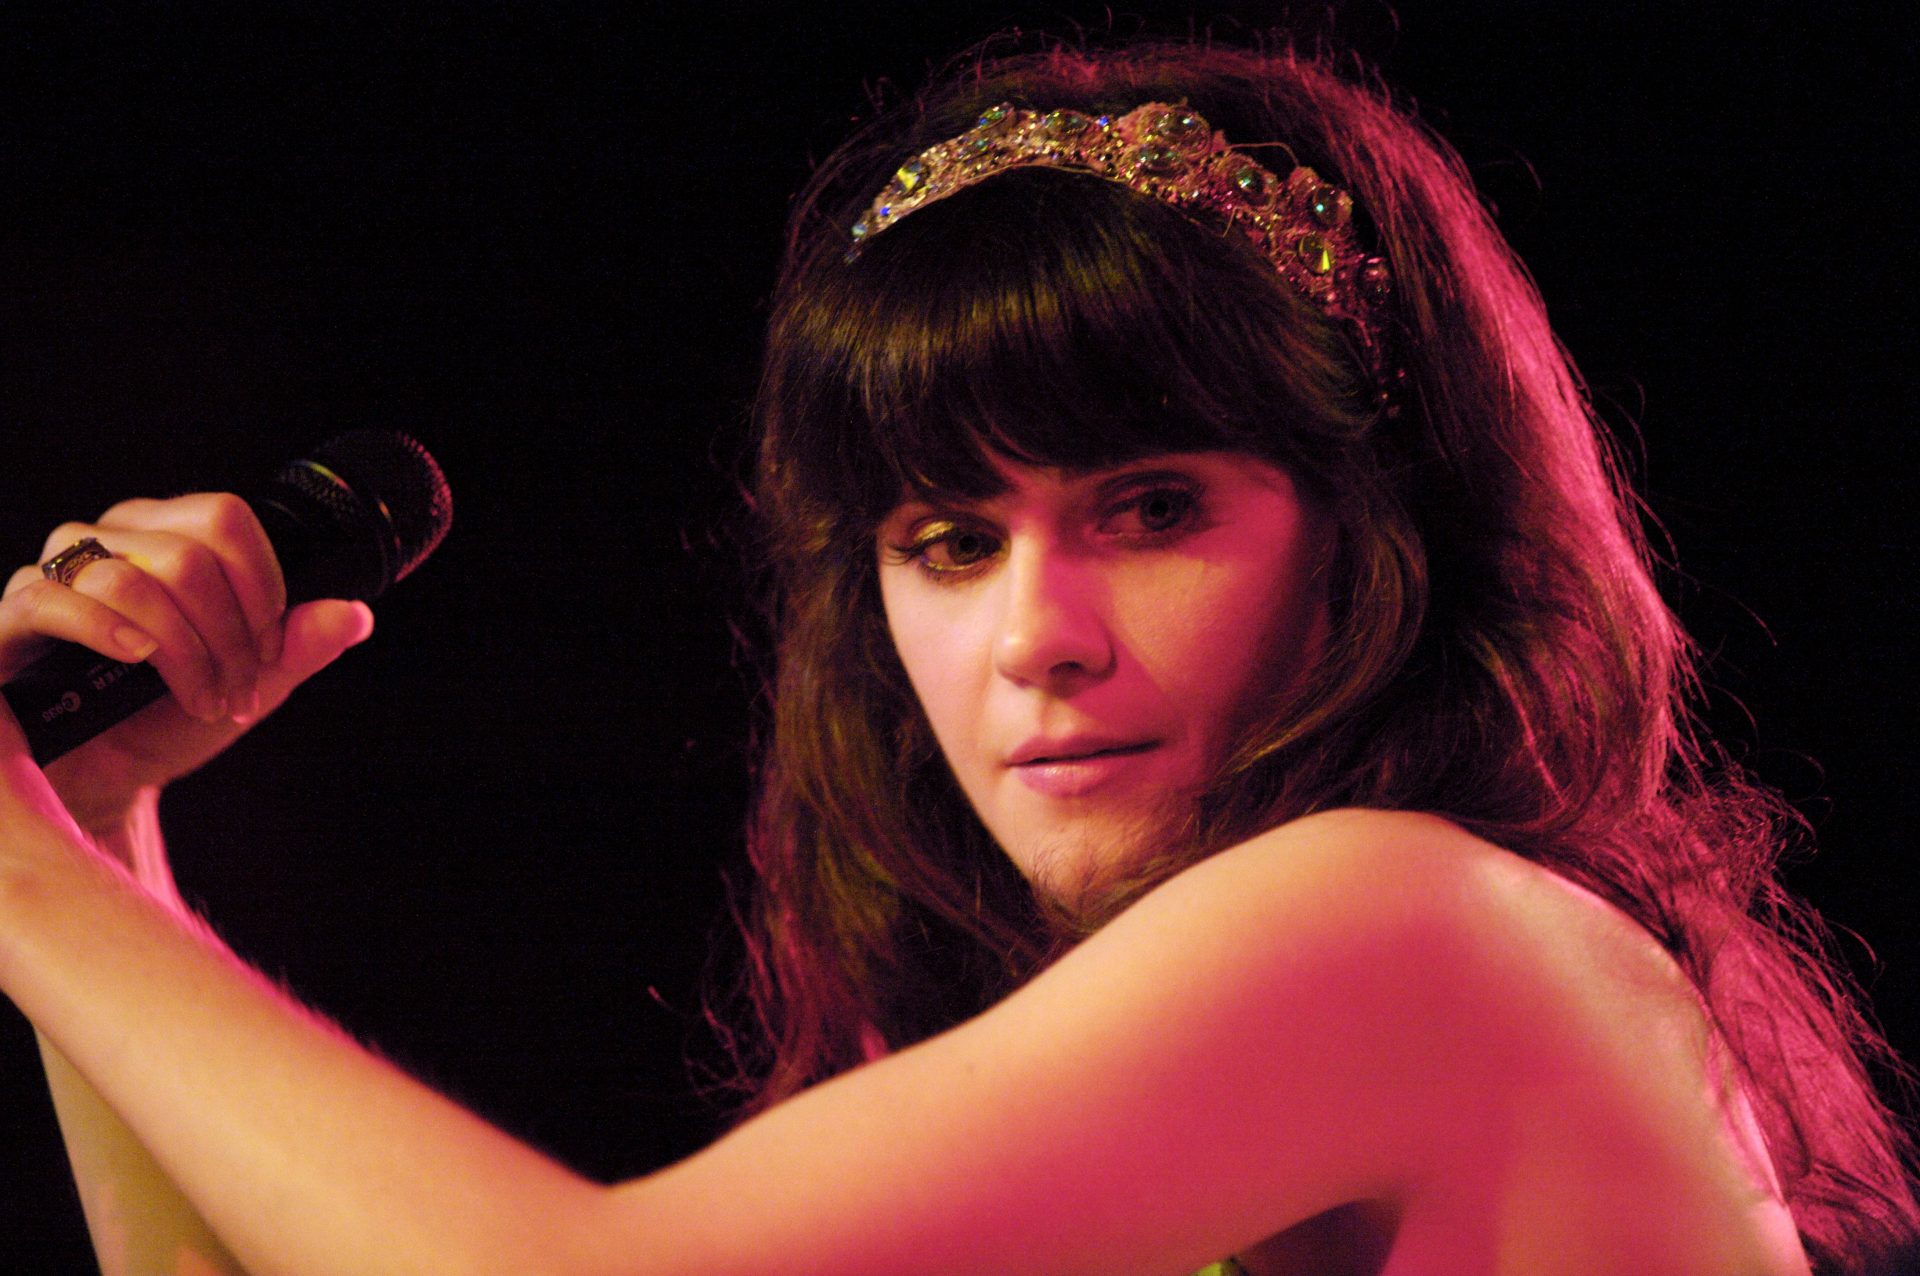 Actress, entertainer, and person not currently married to Ben Gibbard, Zooey Deschanel.